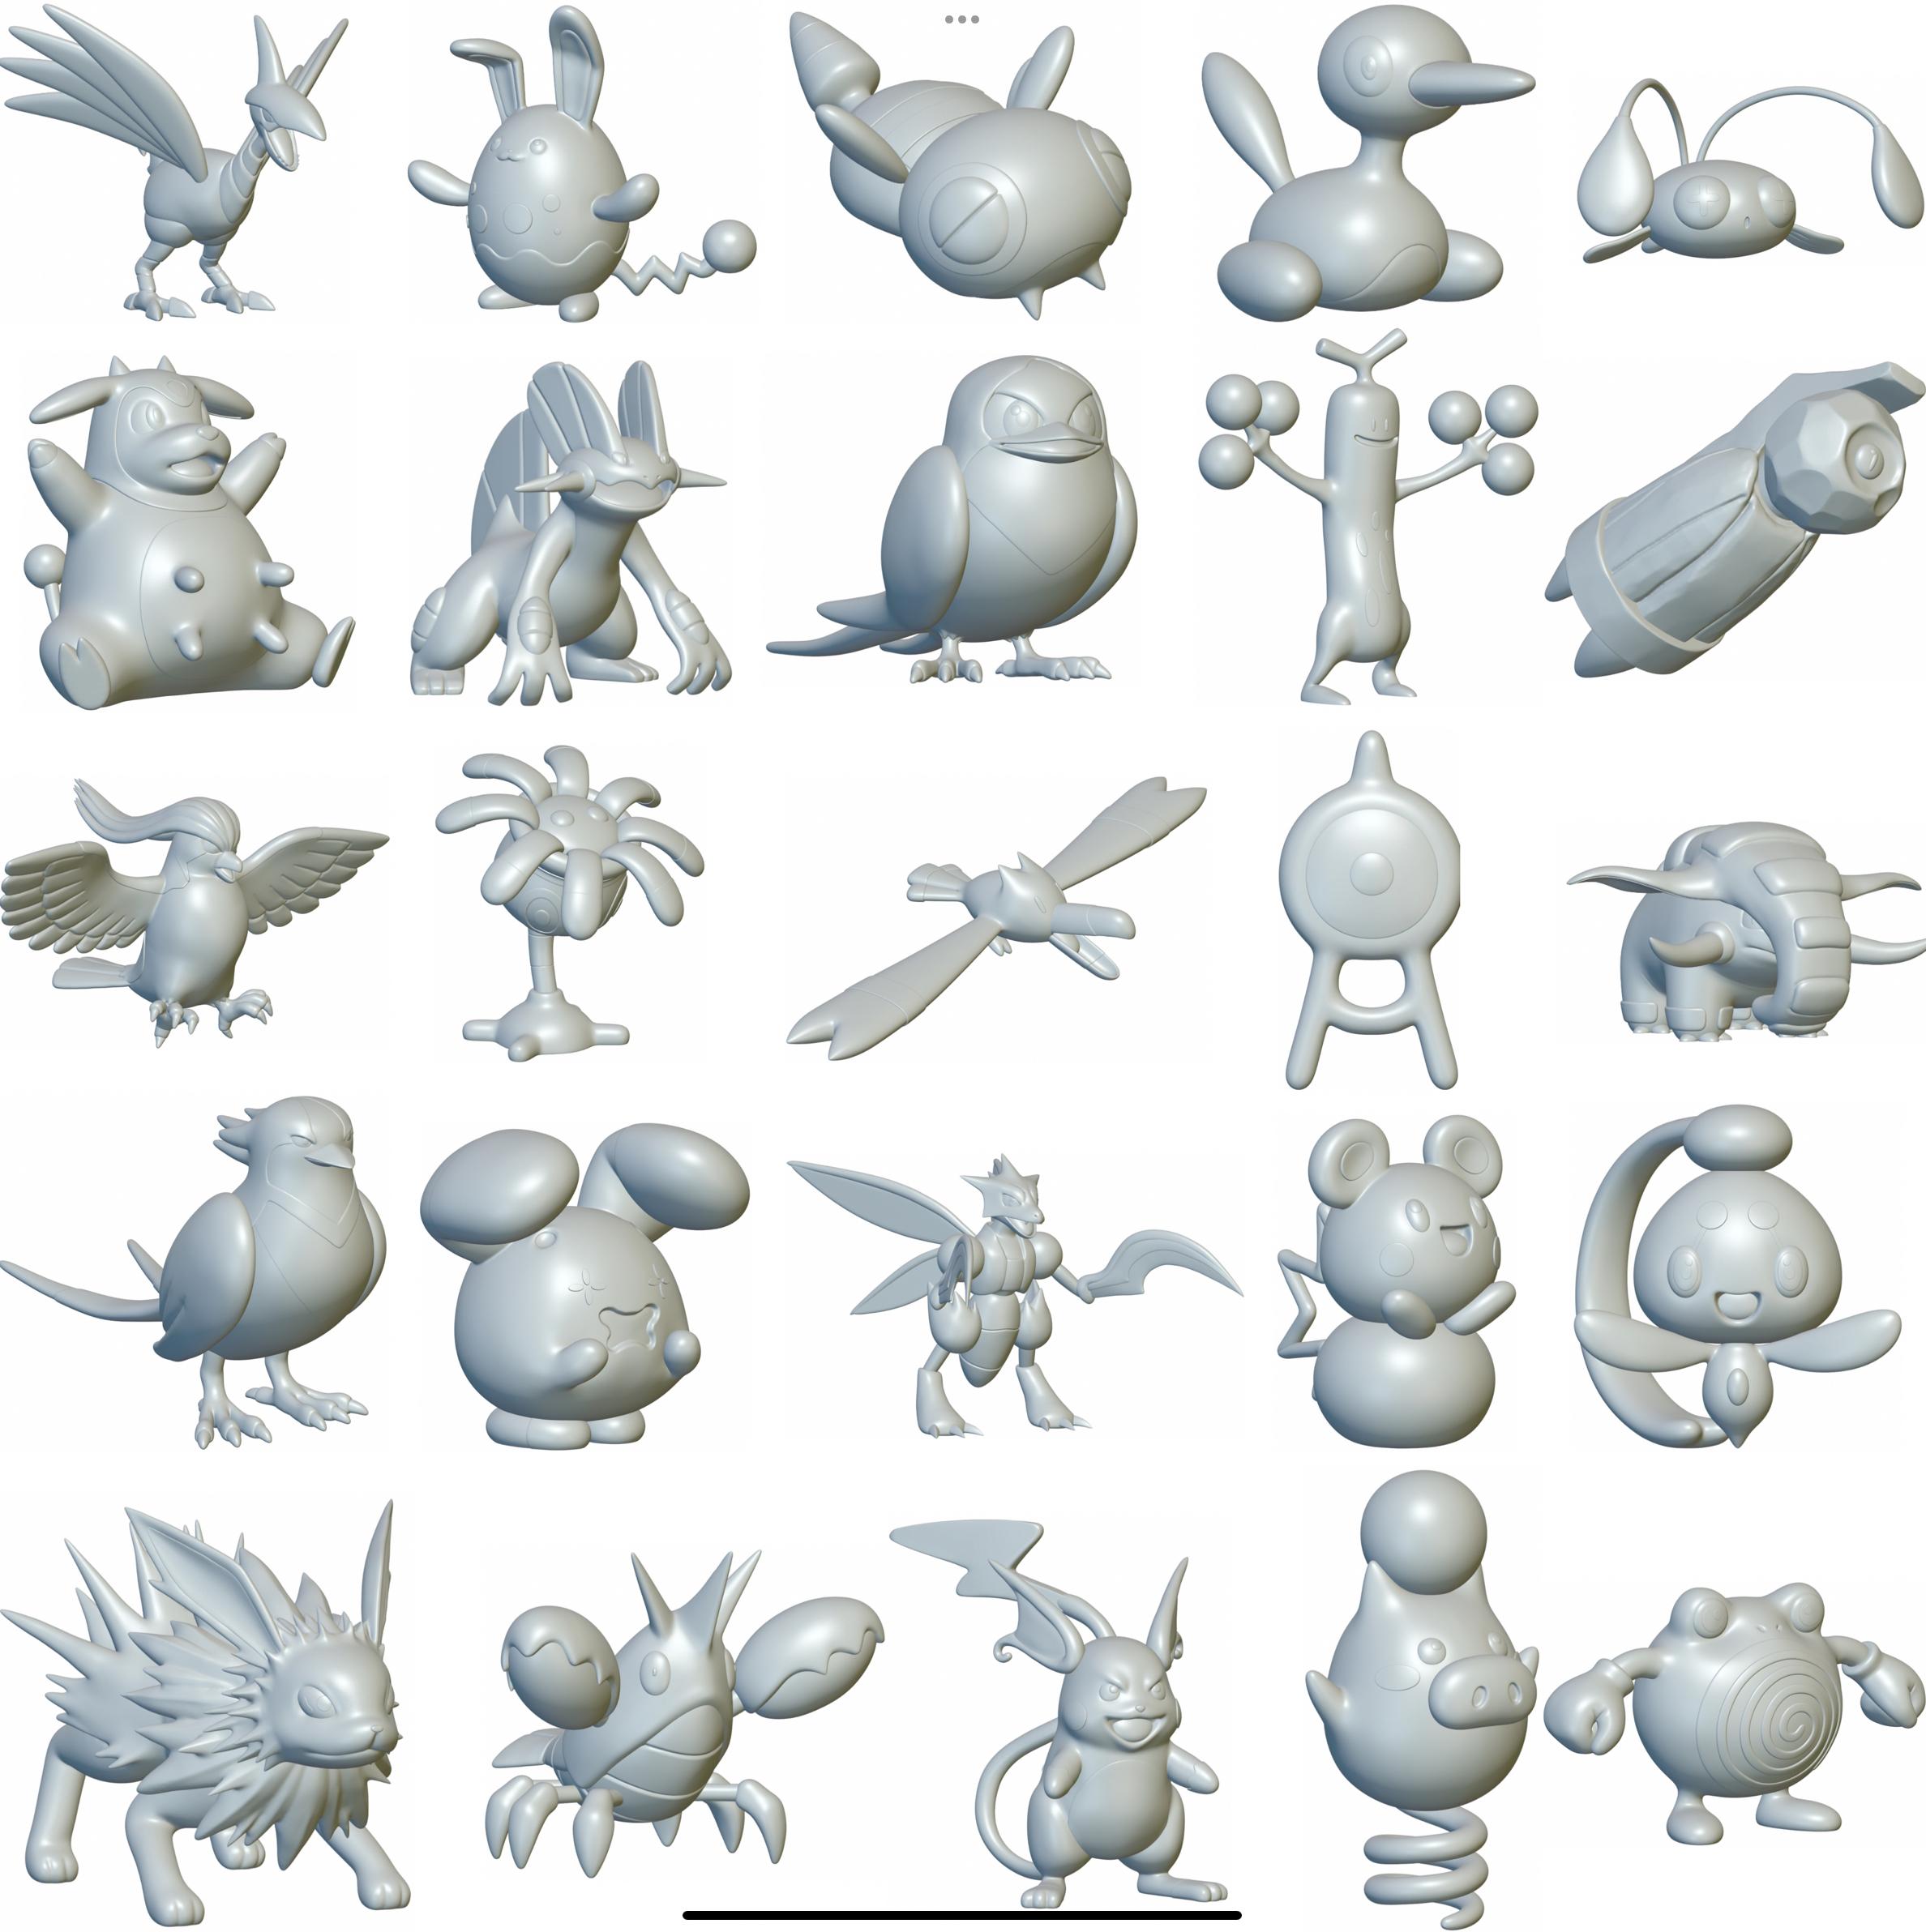 Pokemon Pack Ultra - Optimized for 3D Printing - Updated weekly! (378 so far!) 3d model